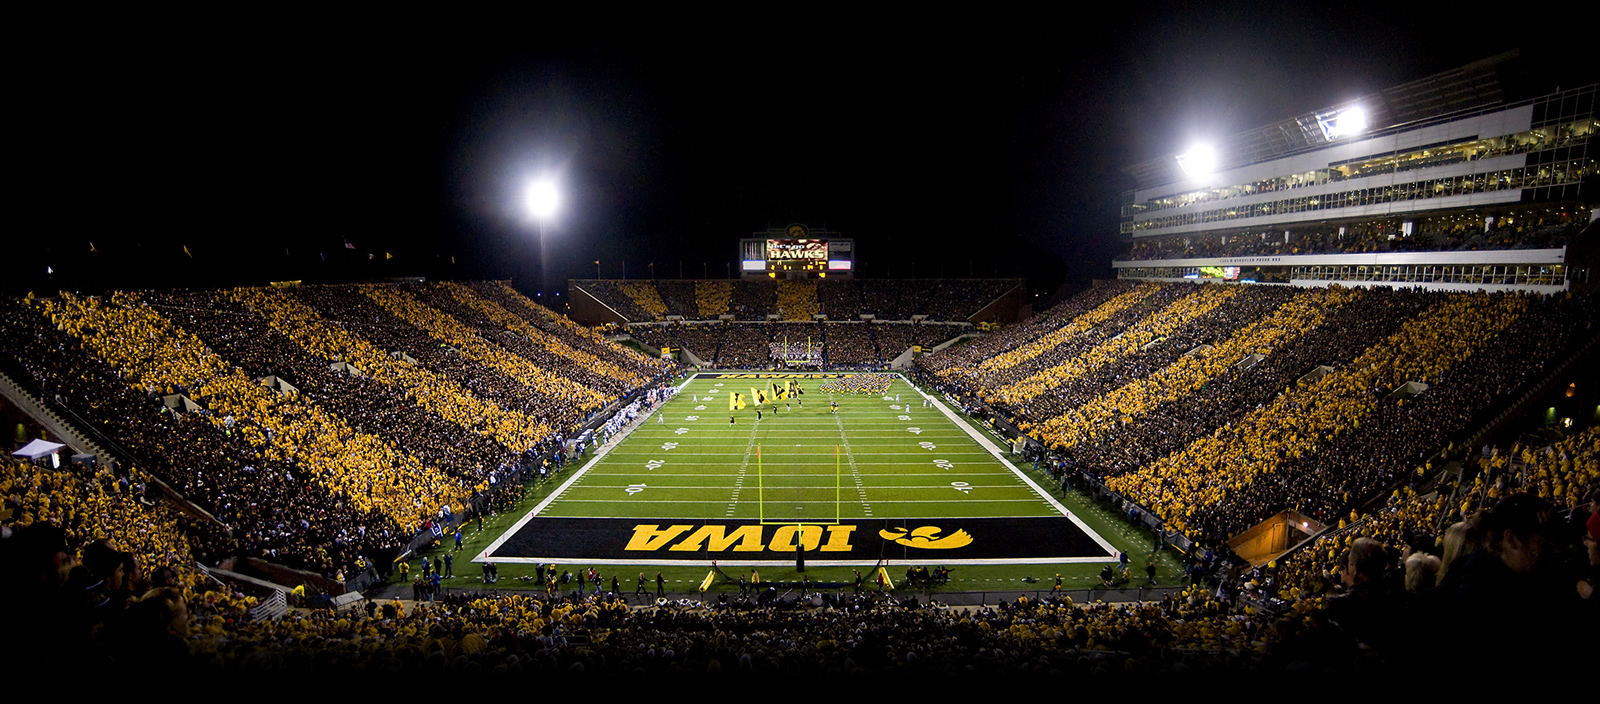 Free download Iowa Hawkeyes Football Schedule 2013 The career leader at iowa [1600x704] for your